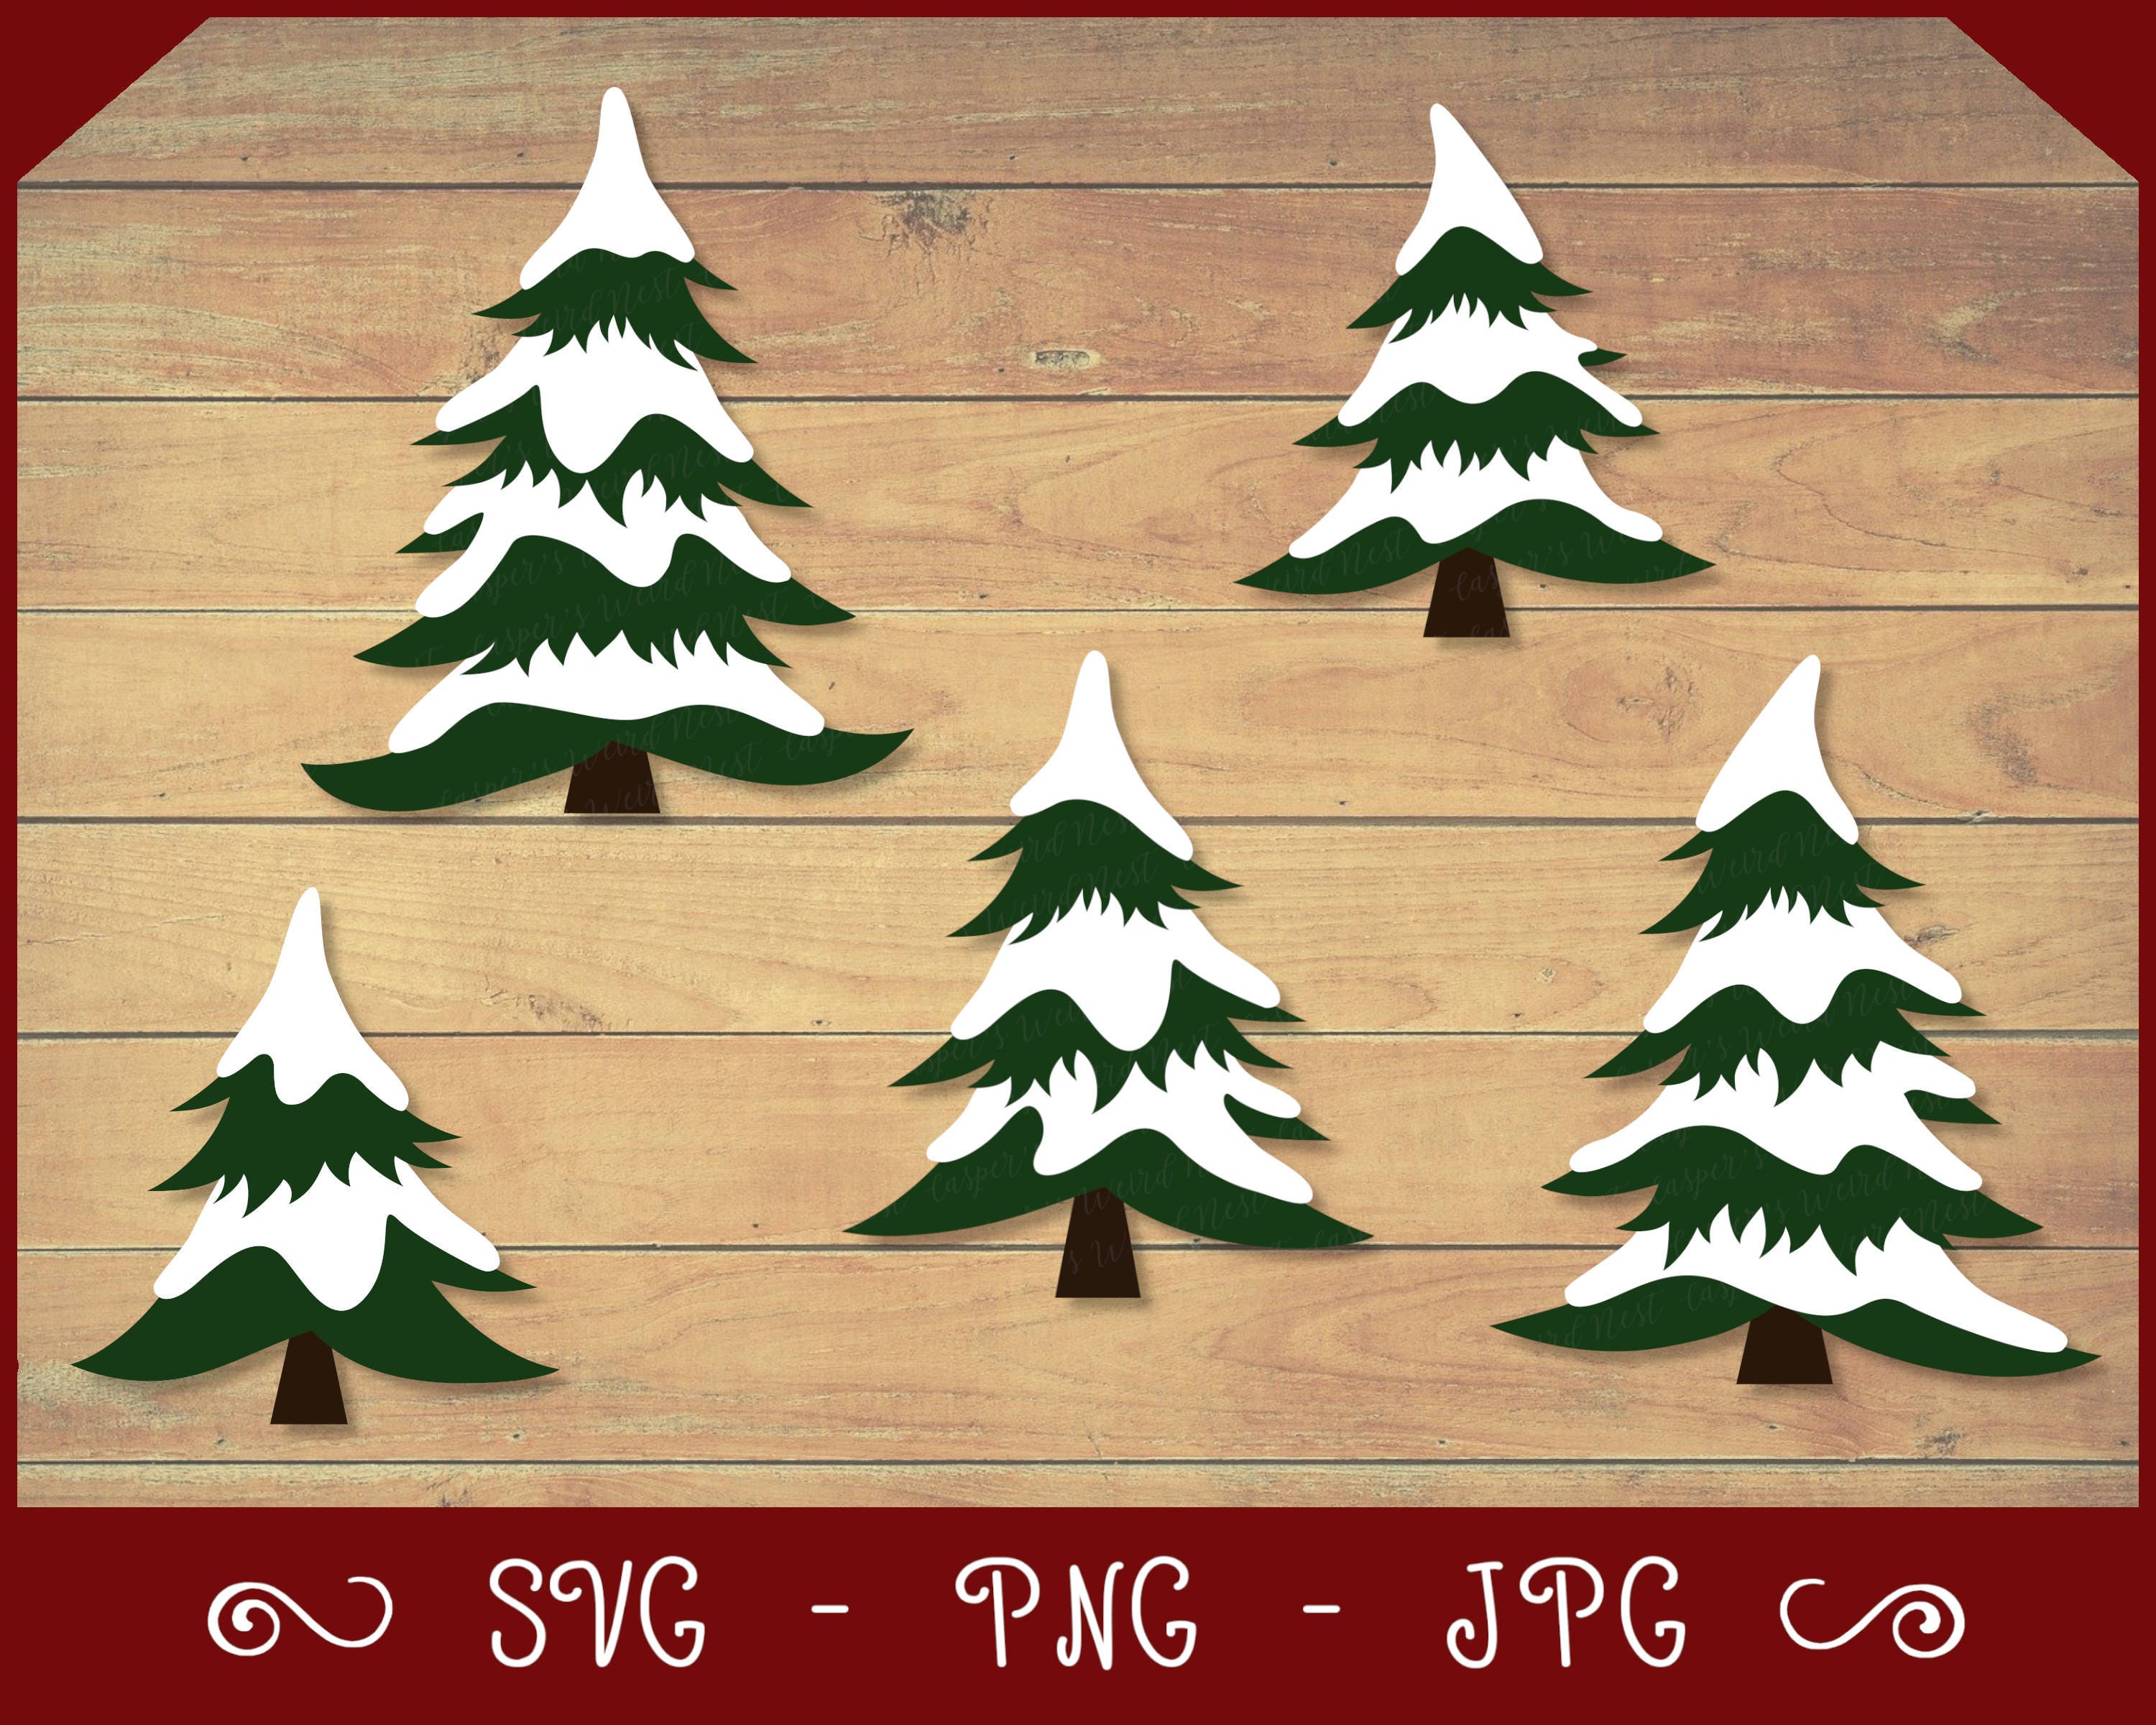 Snowy Christmas trees - SVG PNG JPG - transparent background - commercial use - instant download